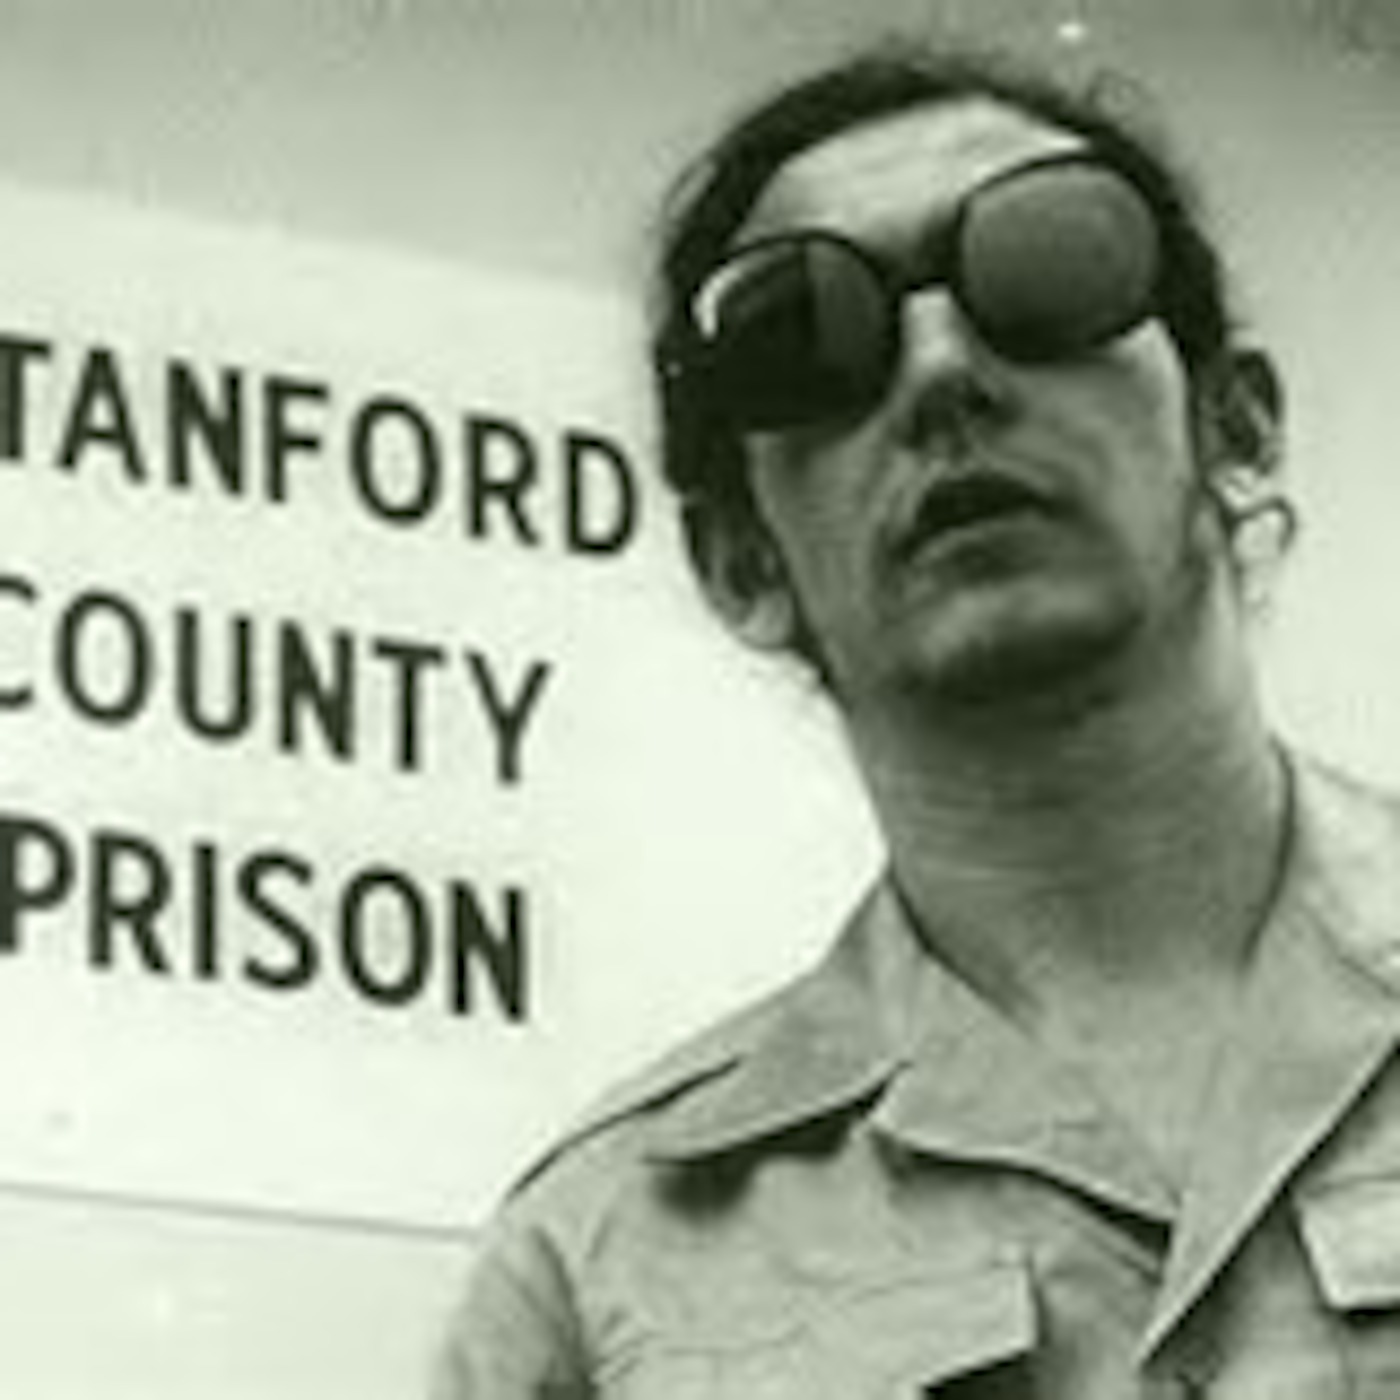 Stanford Prison experiment - Introduction and Method